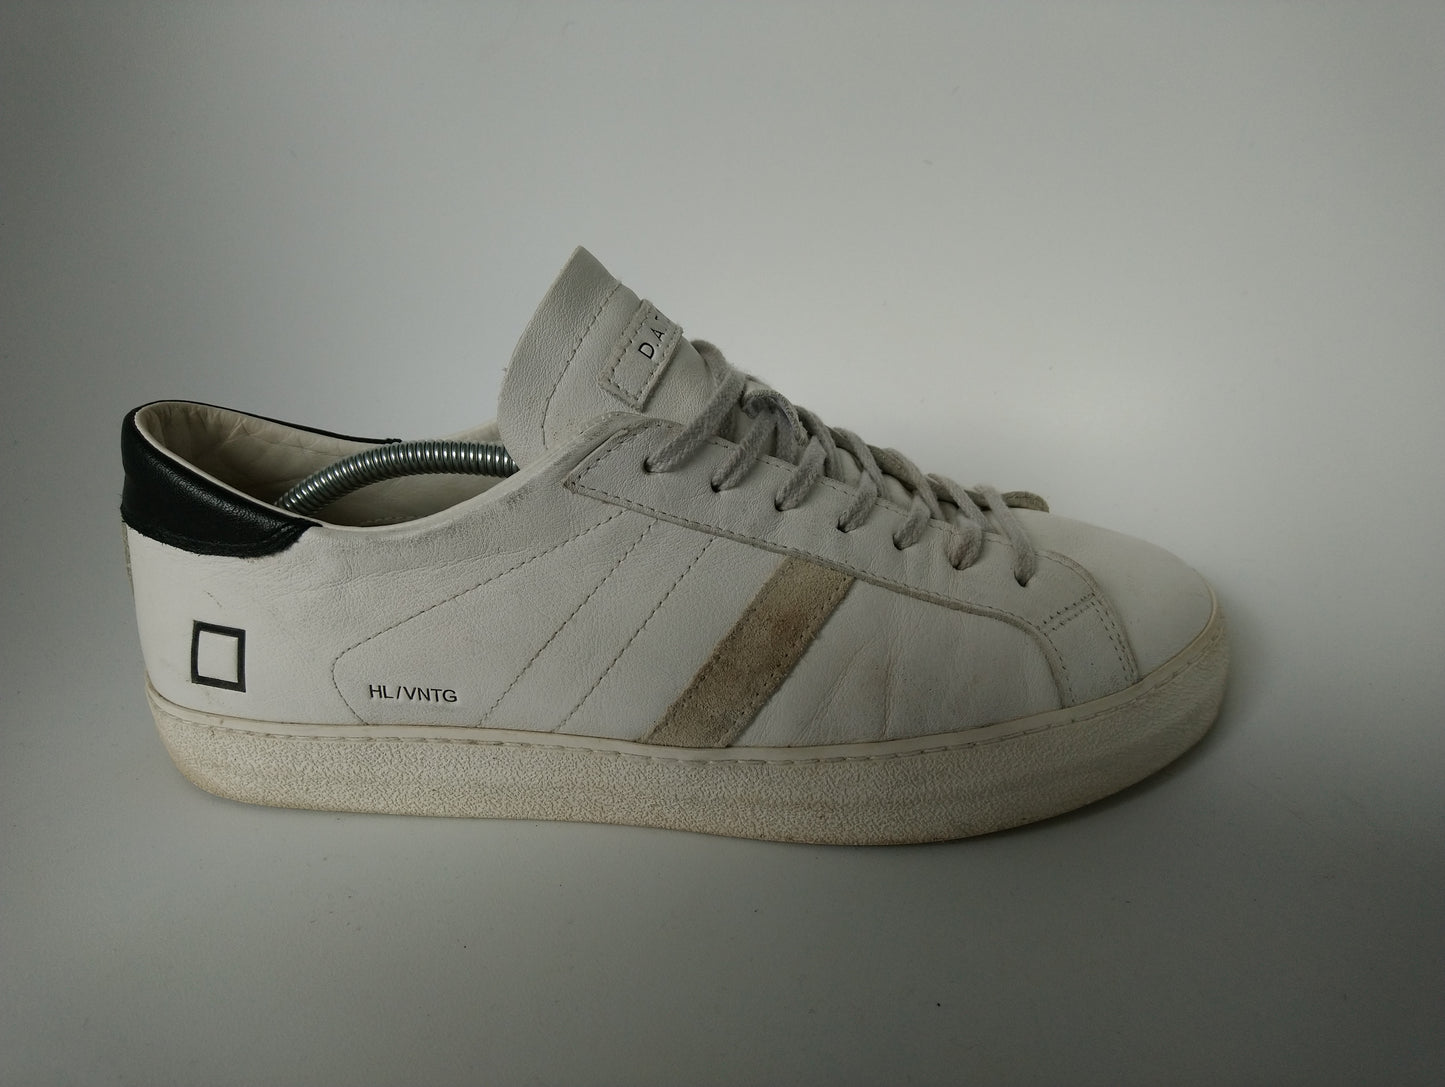 D.A.T.E. Leather sneakers. White. Size 44.